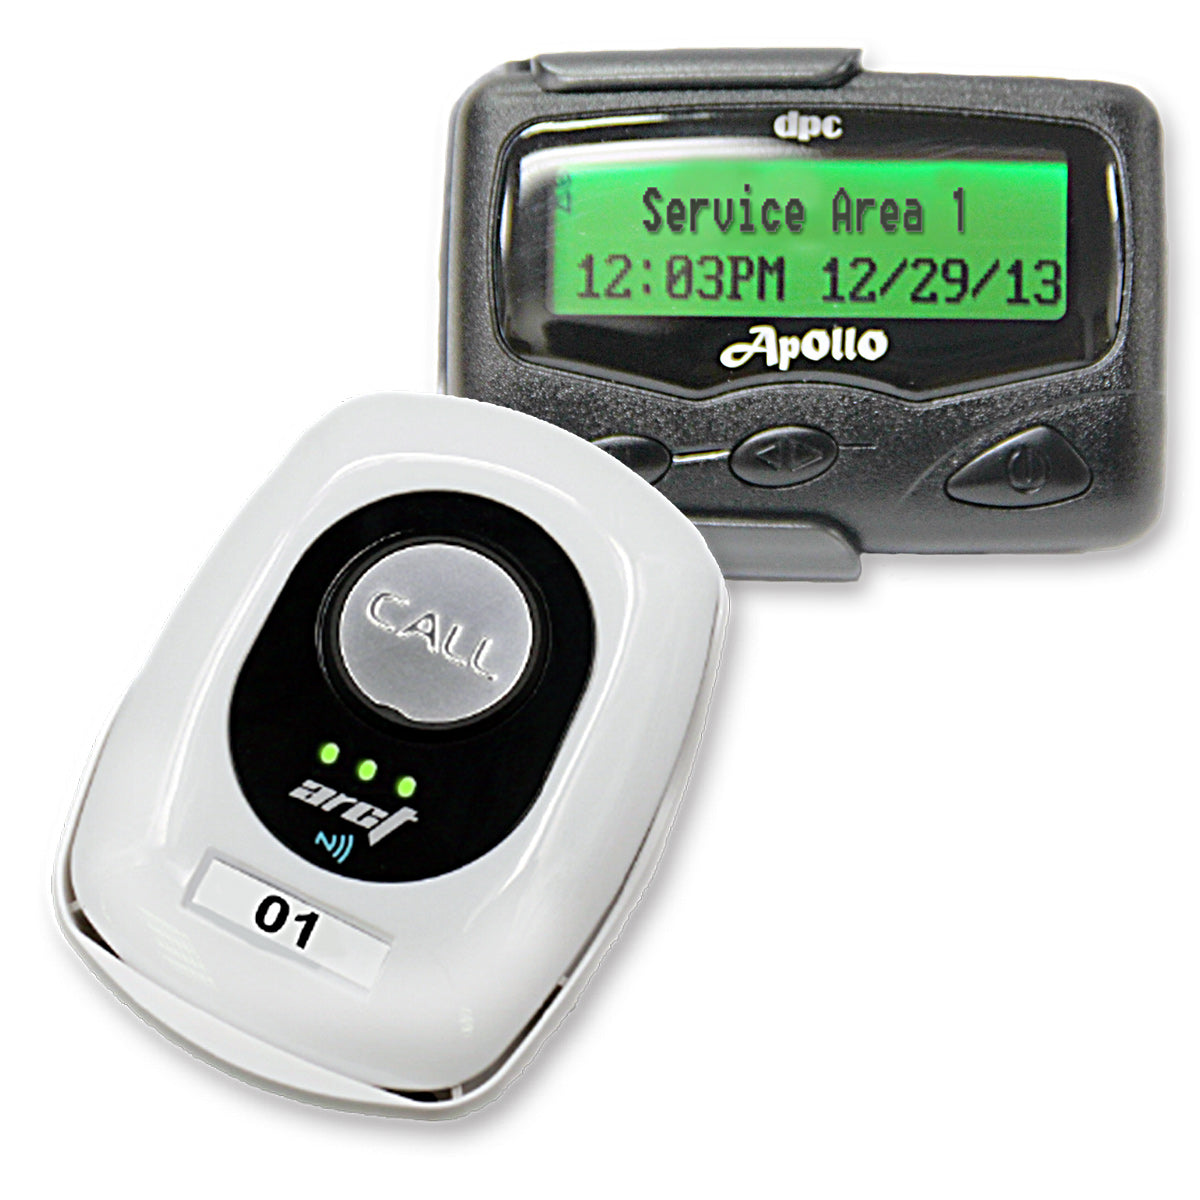 Pager System Pfs 01 Pagers ARCT Pocket Size 1 Button Push For Service System 1200x1200 1200x1200 ?v=1572388635